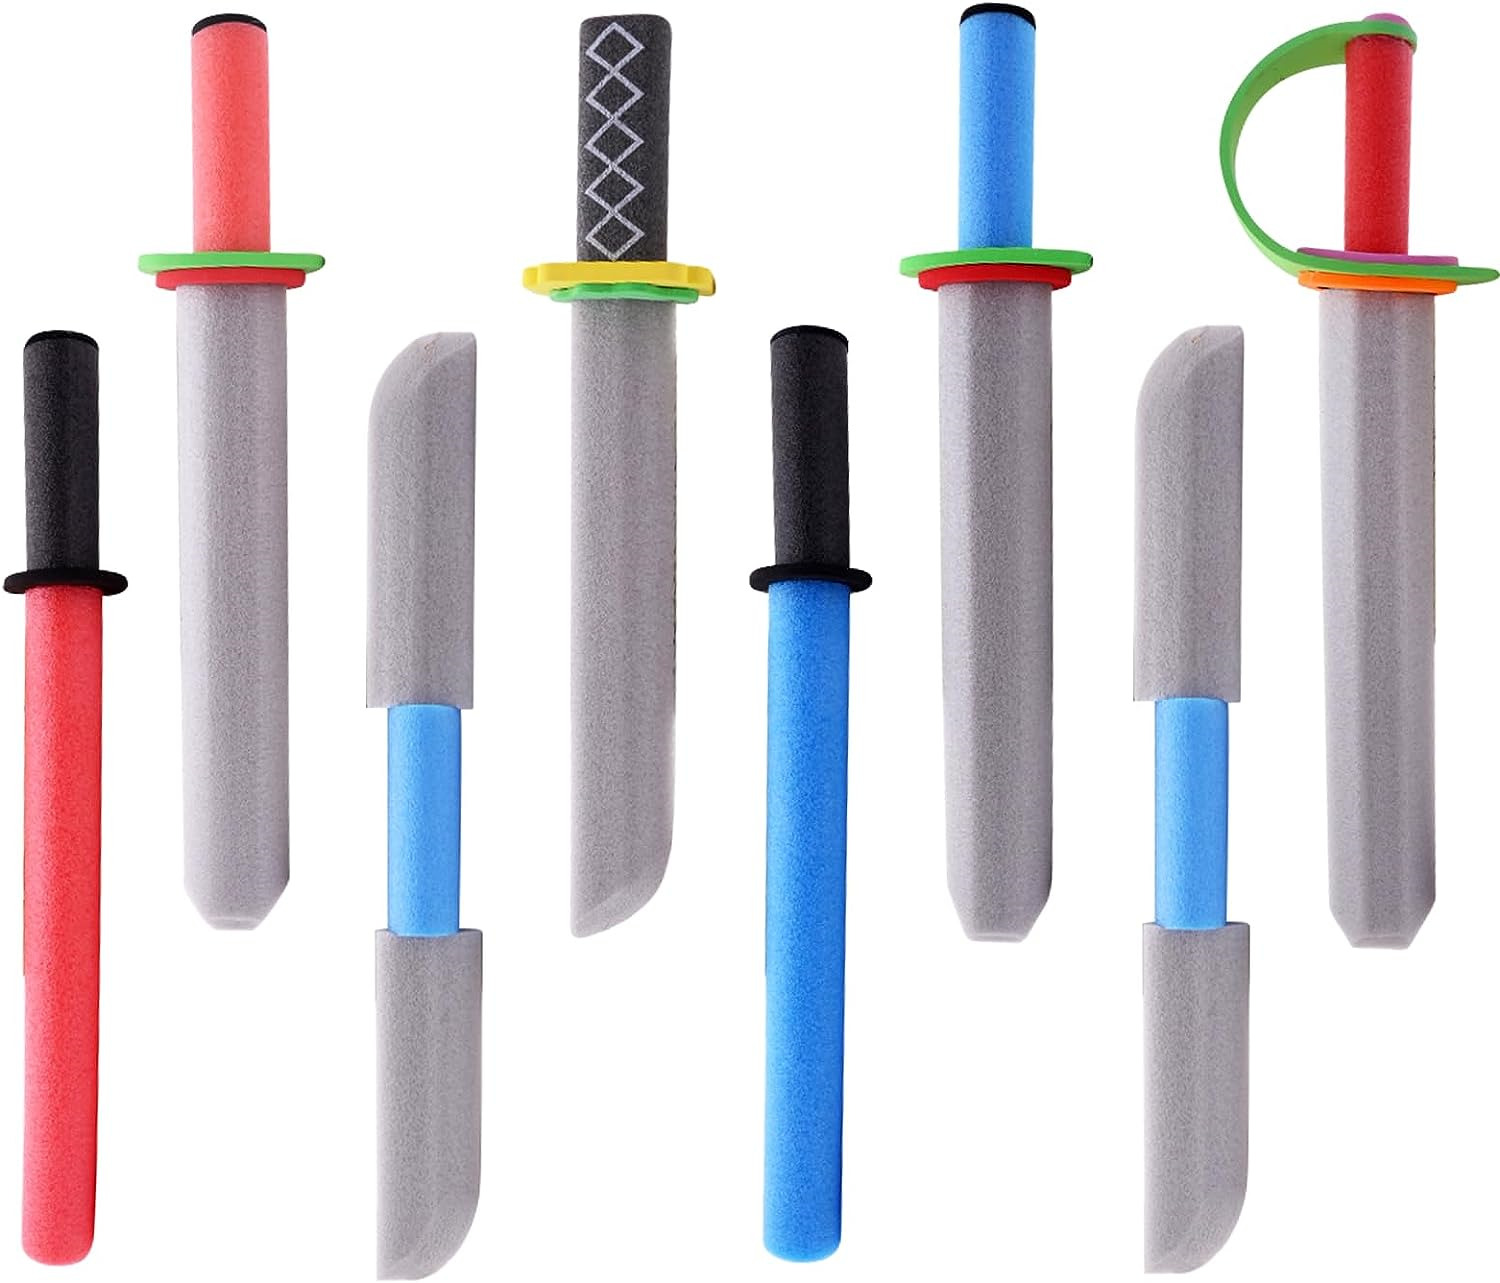 Toy Foam Swords for Kids Warrior Knight Weapon Pretend Play Toy Set for Boys ...